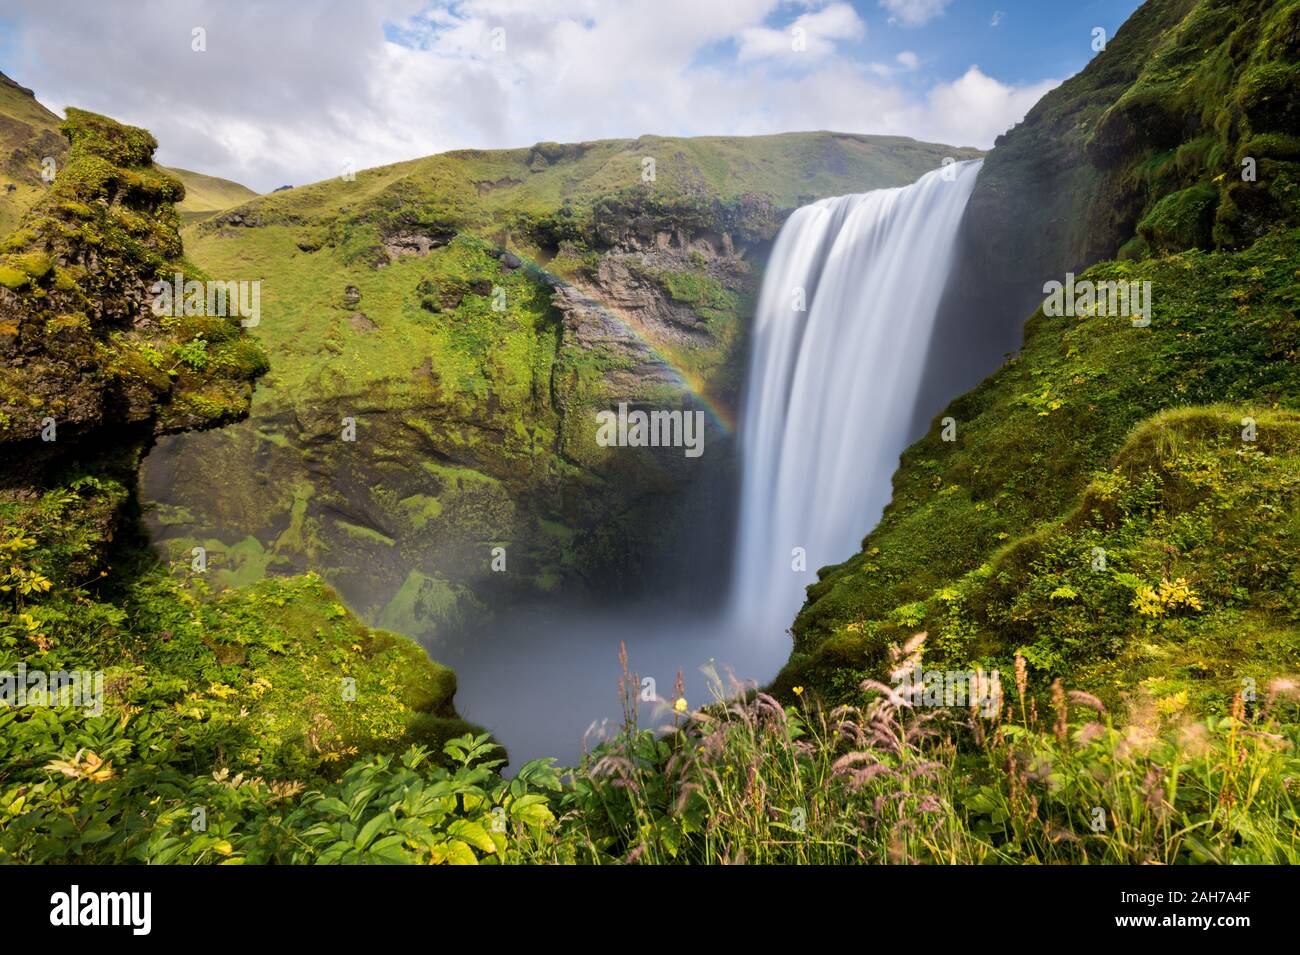 Long exposure of the icelandic waterfall of Skogafoss, surrounded by cliffs covered with green musk, under a blue sky with clouds Stock Photo